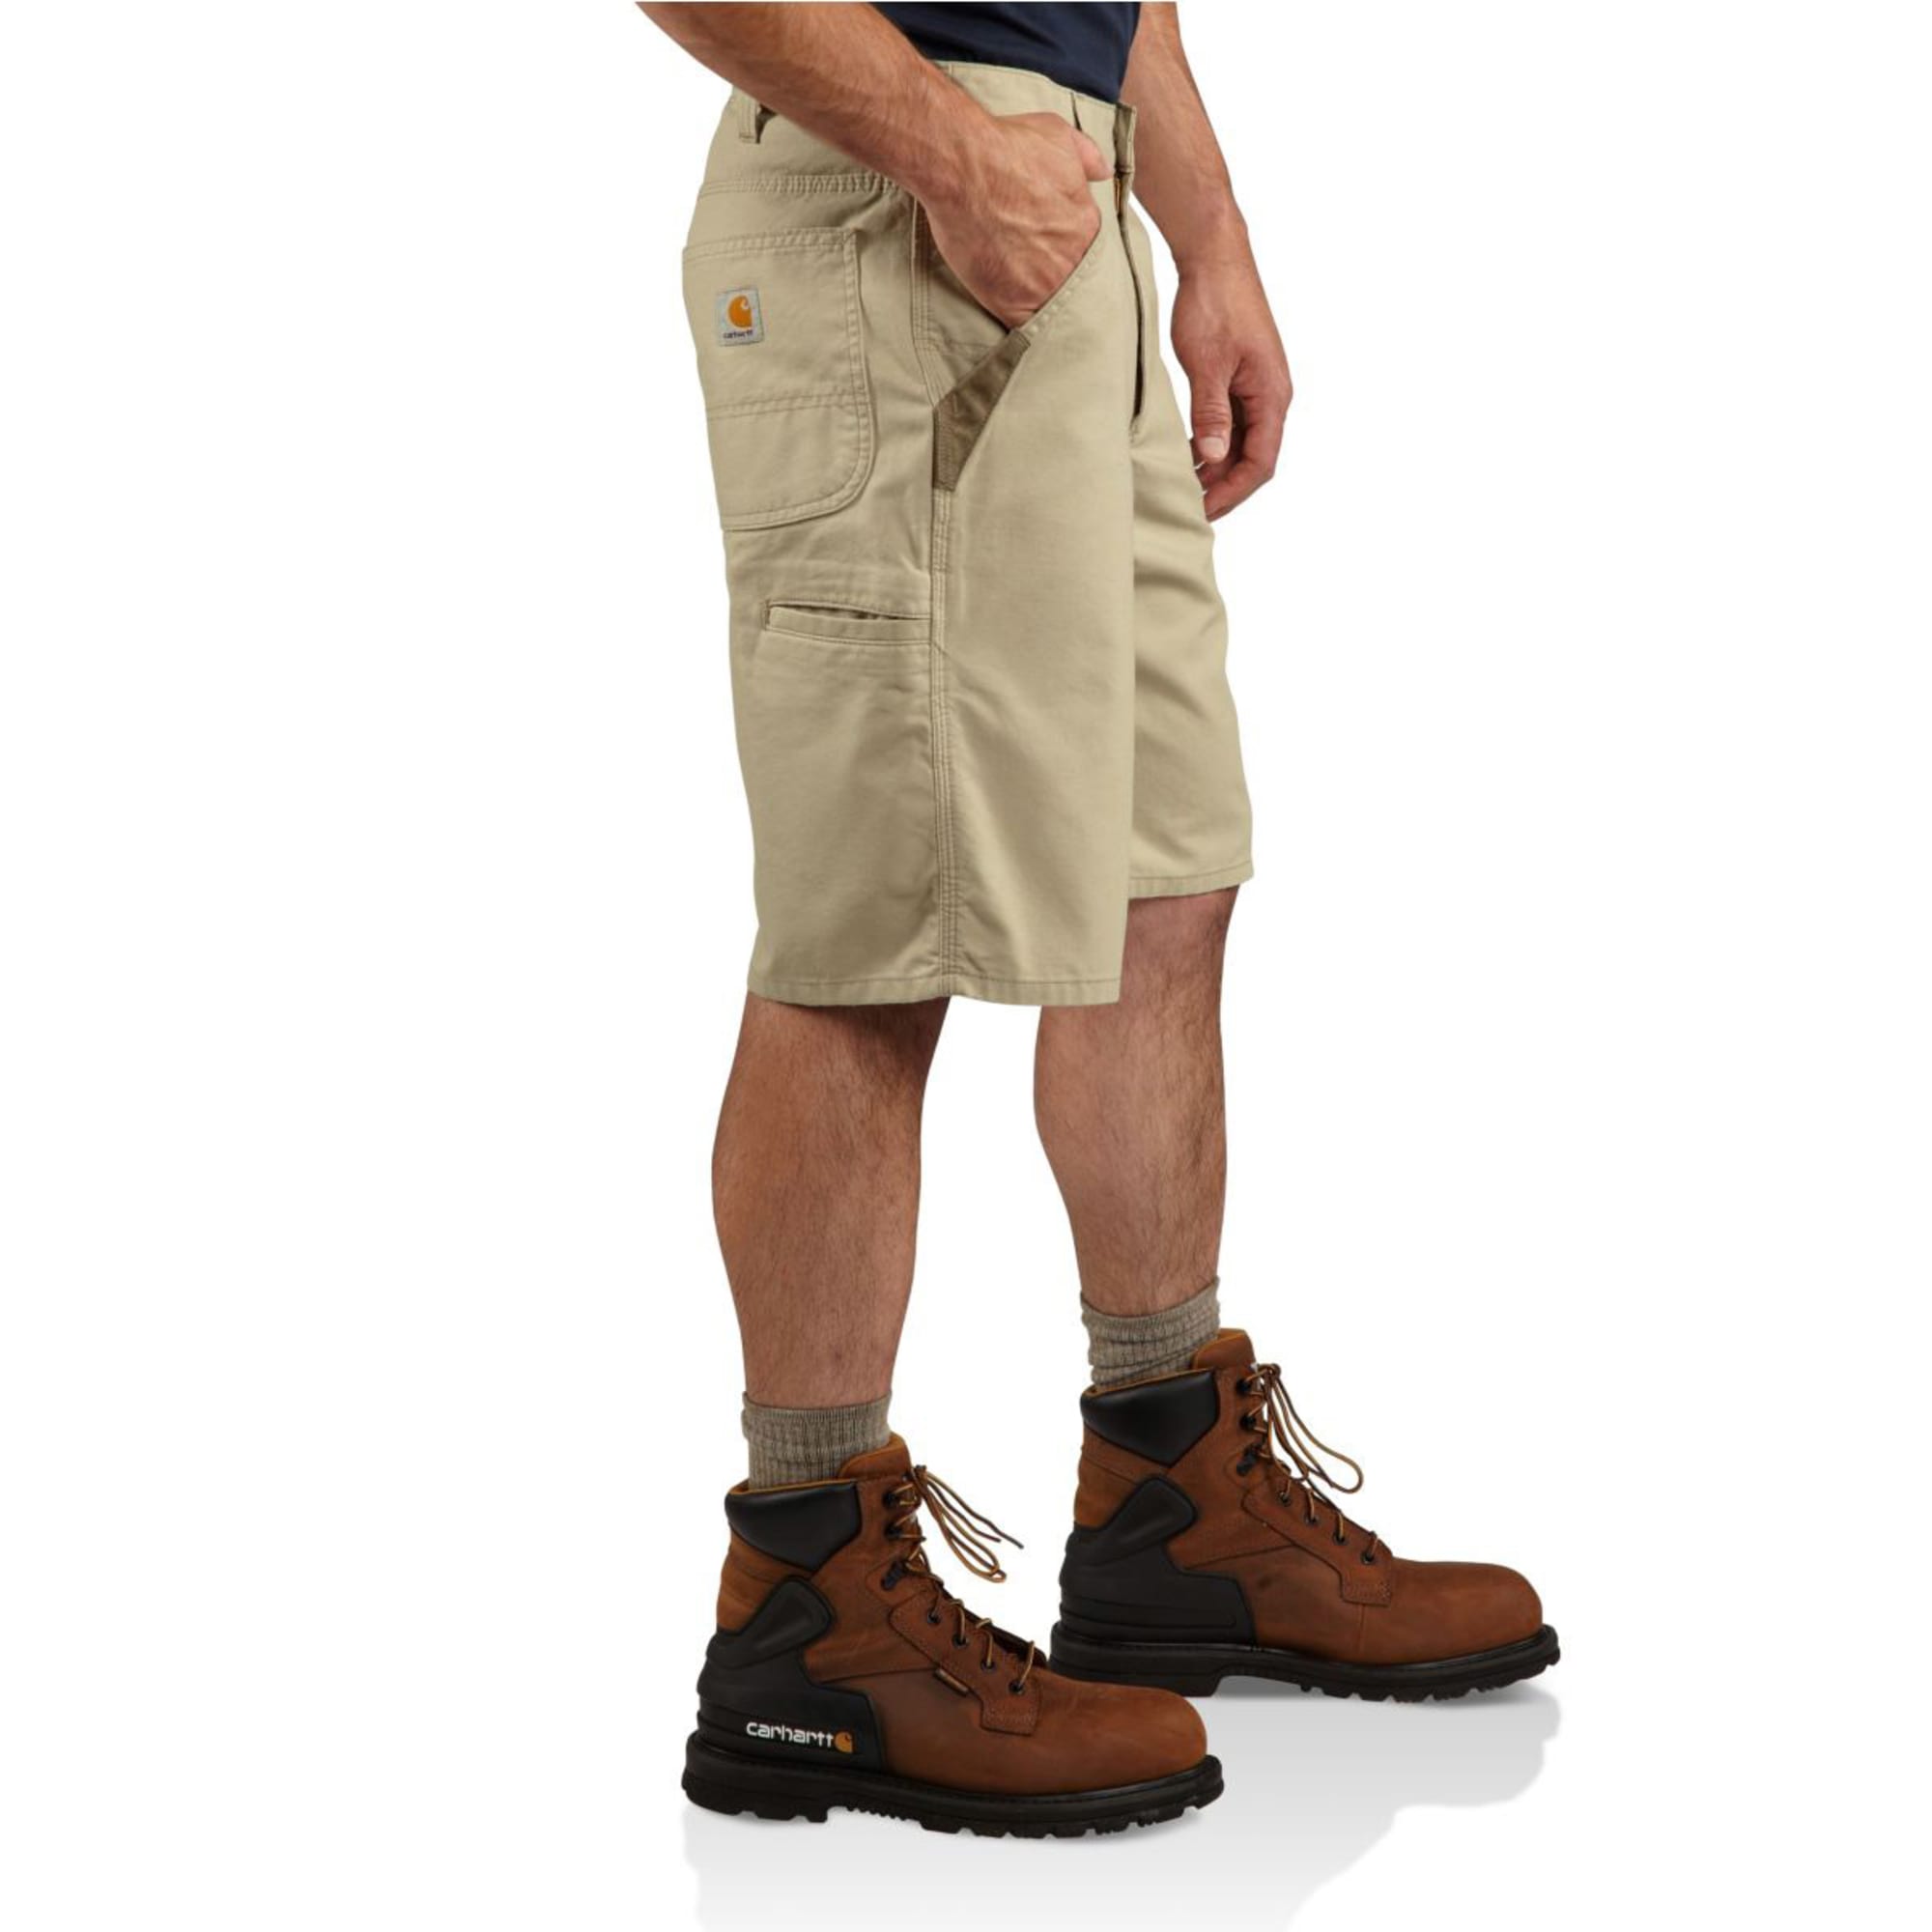 work boots with shorts